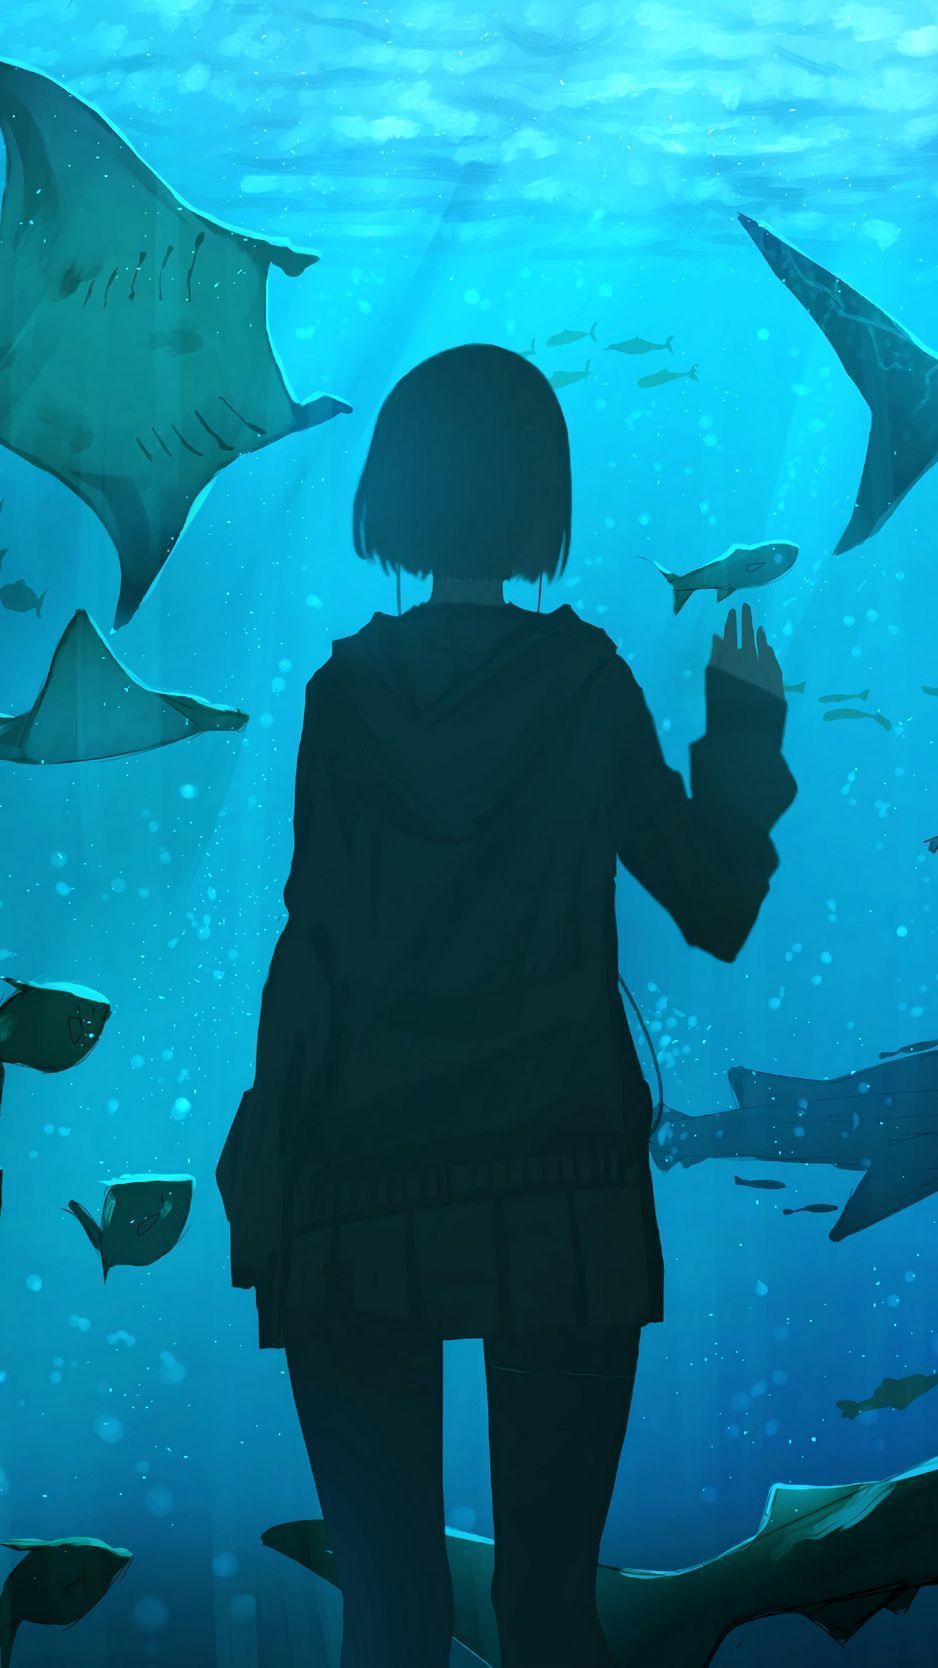 A woman standing in front of many fish - Underwater, fish